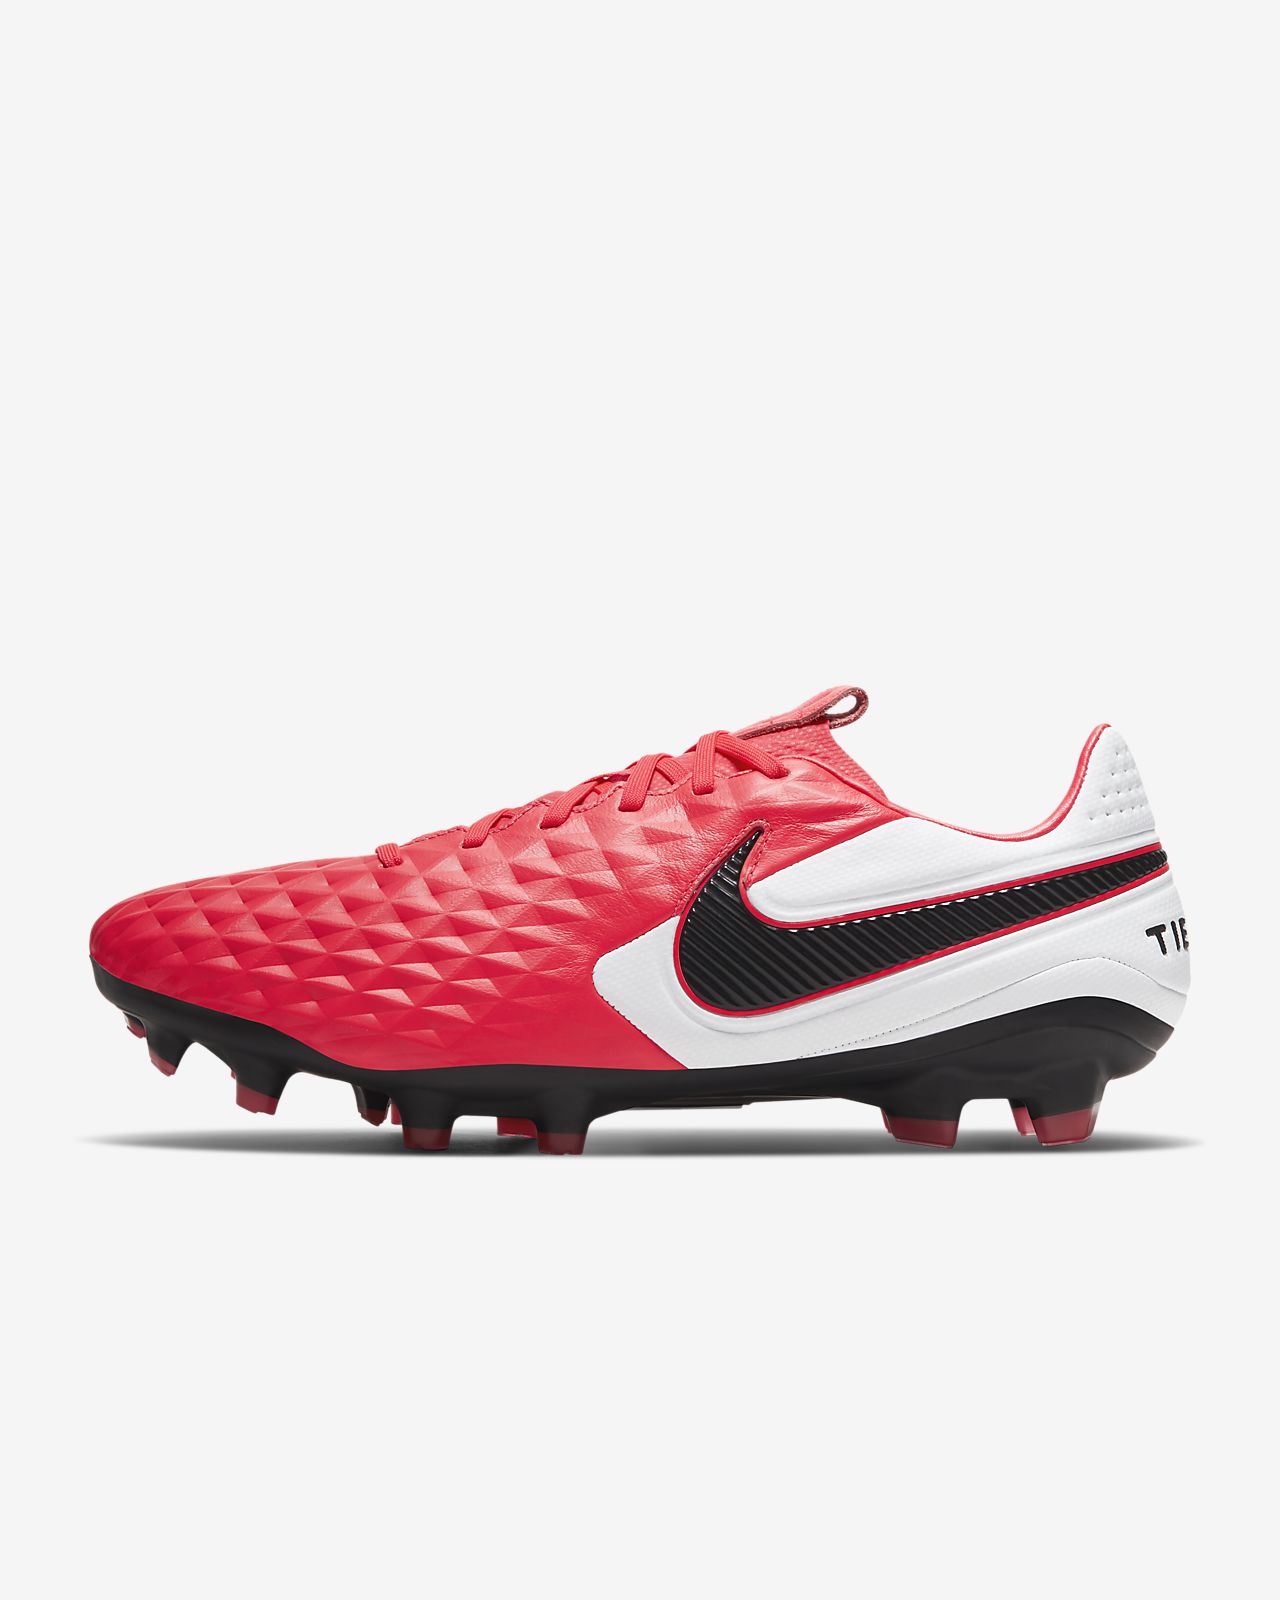 Nike Timing Legend 8 Academy FG MG shoe boots.